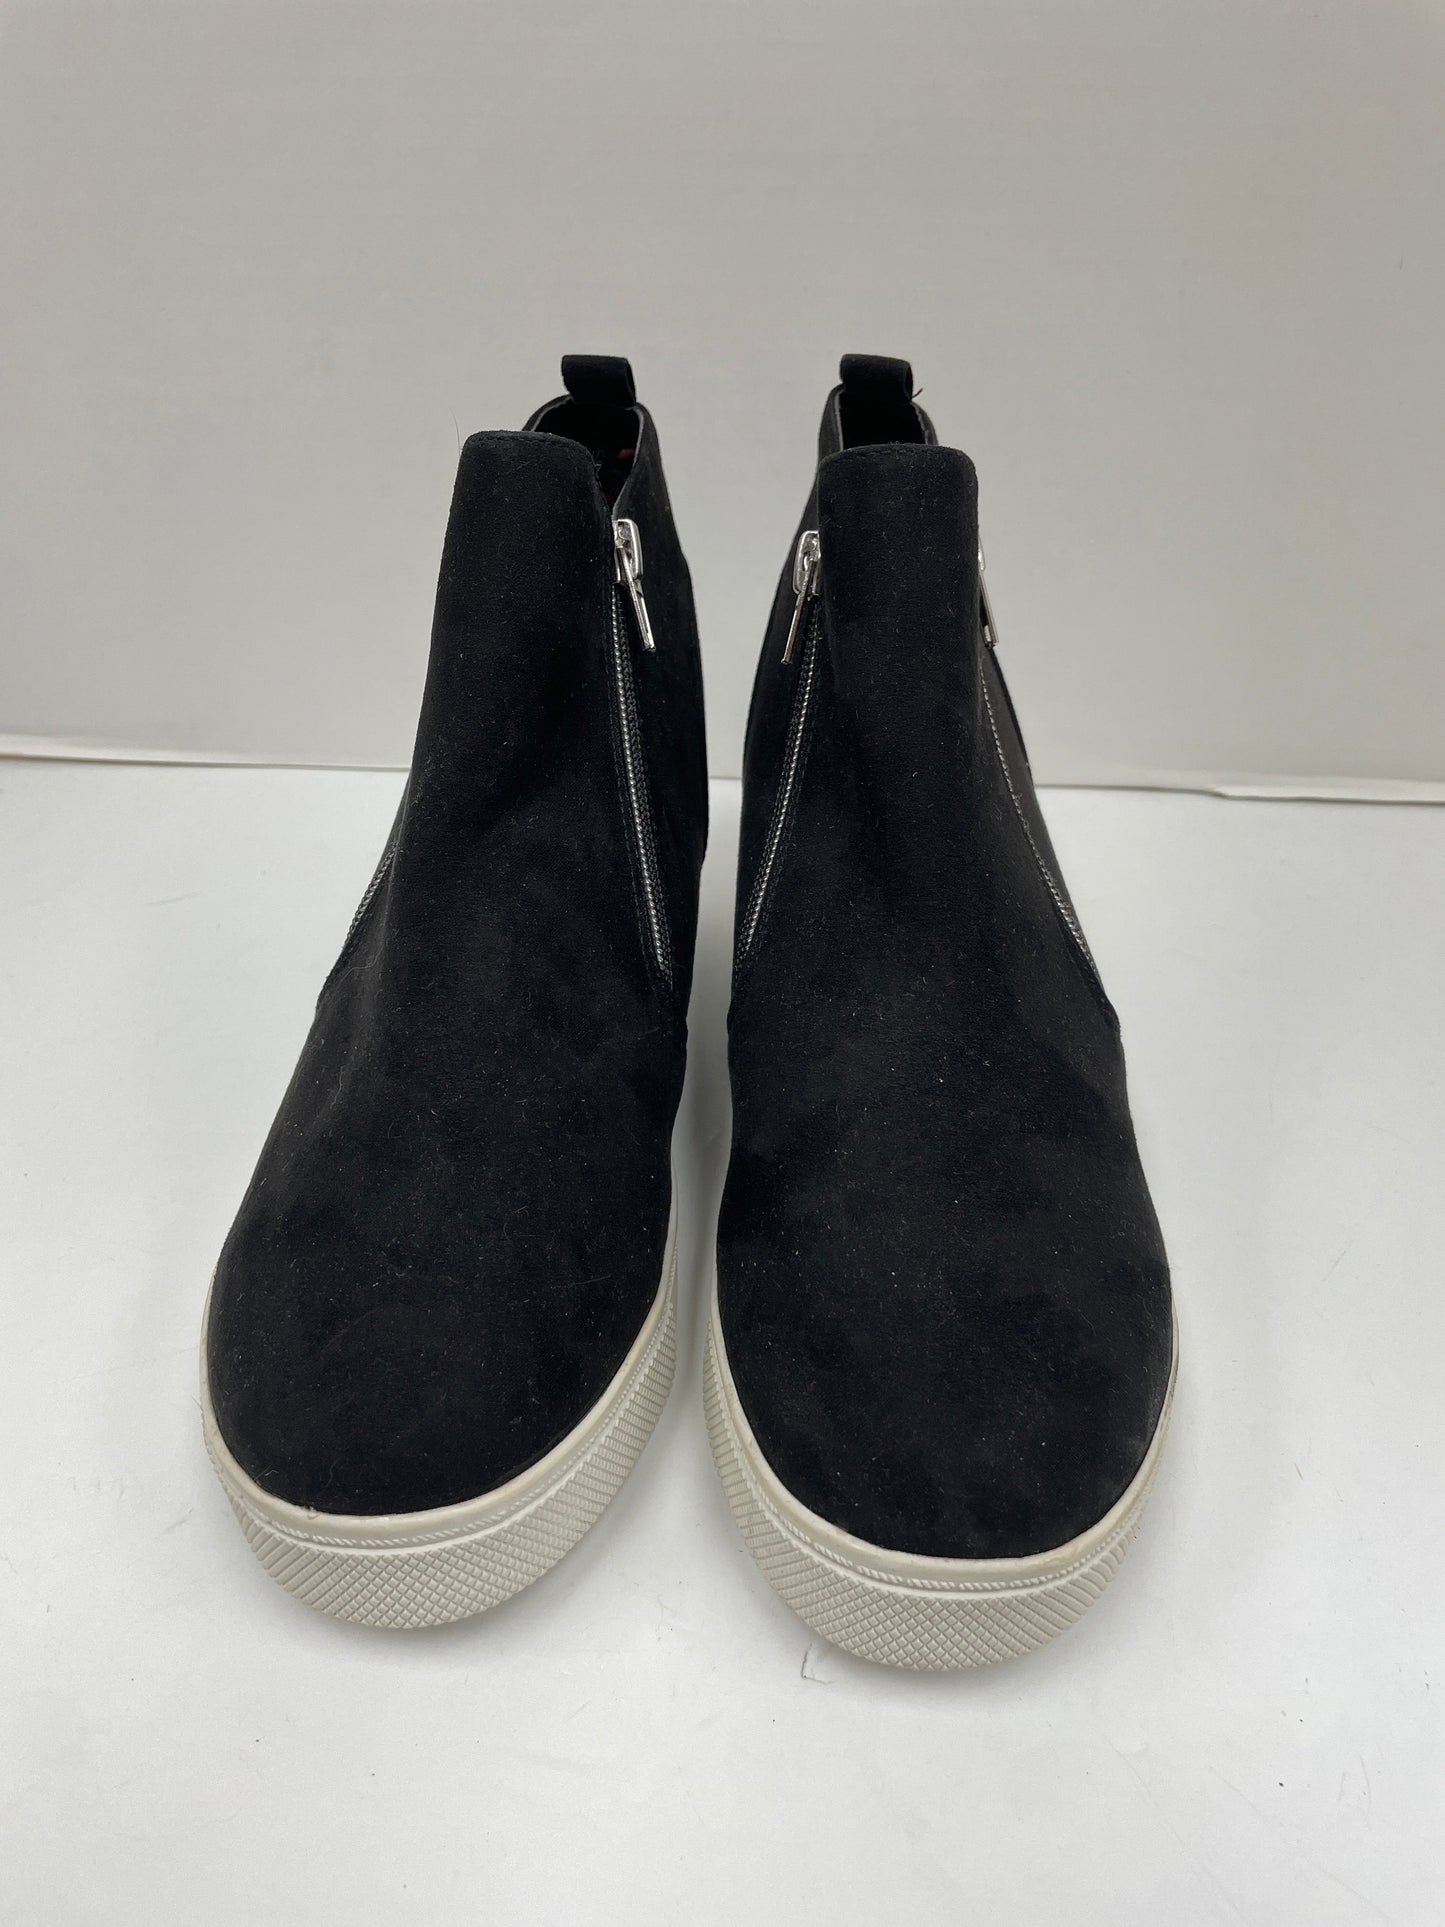 Shoes Sneakers By Steve Madden  Size: 6